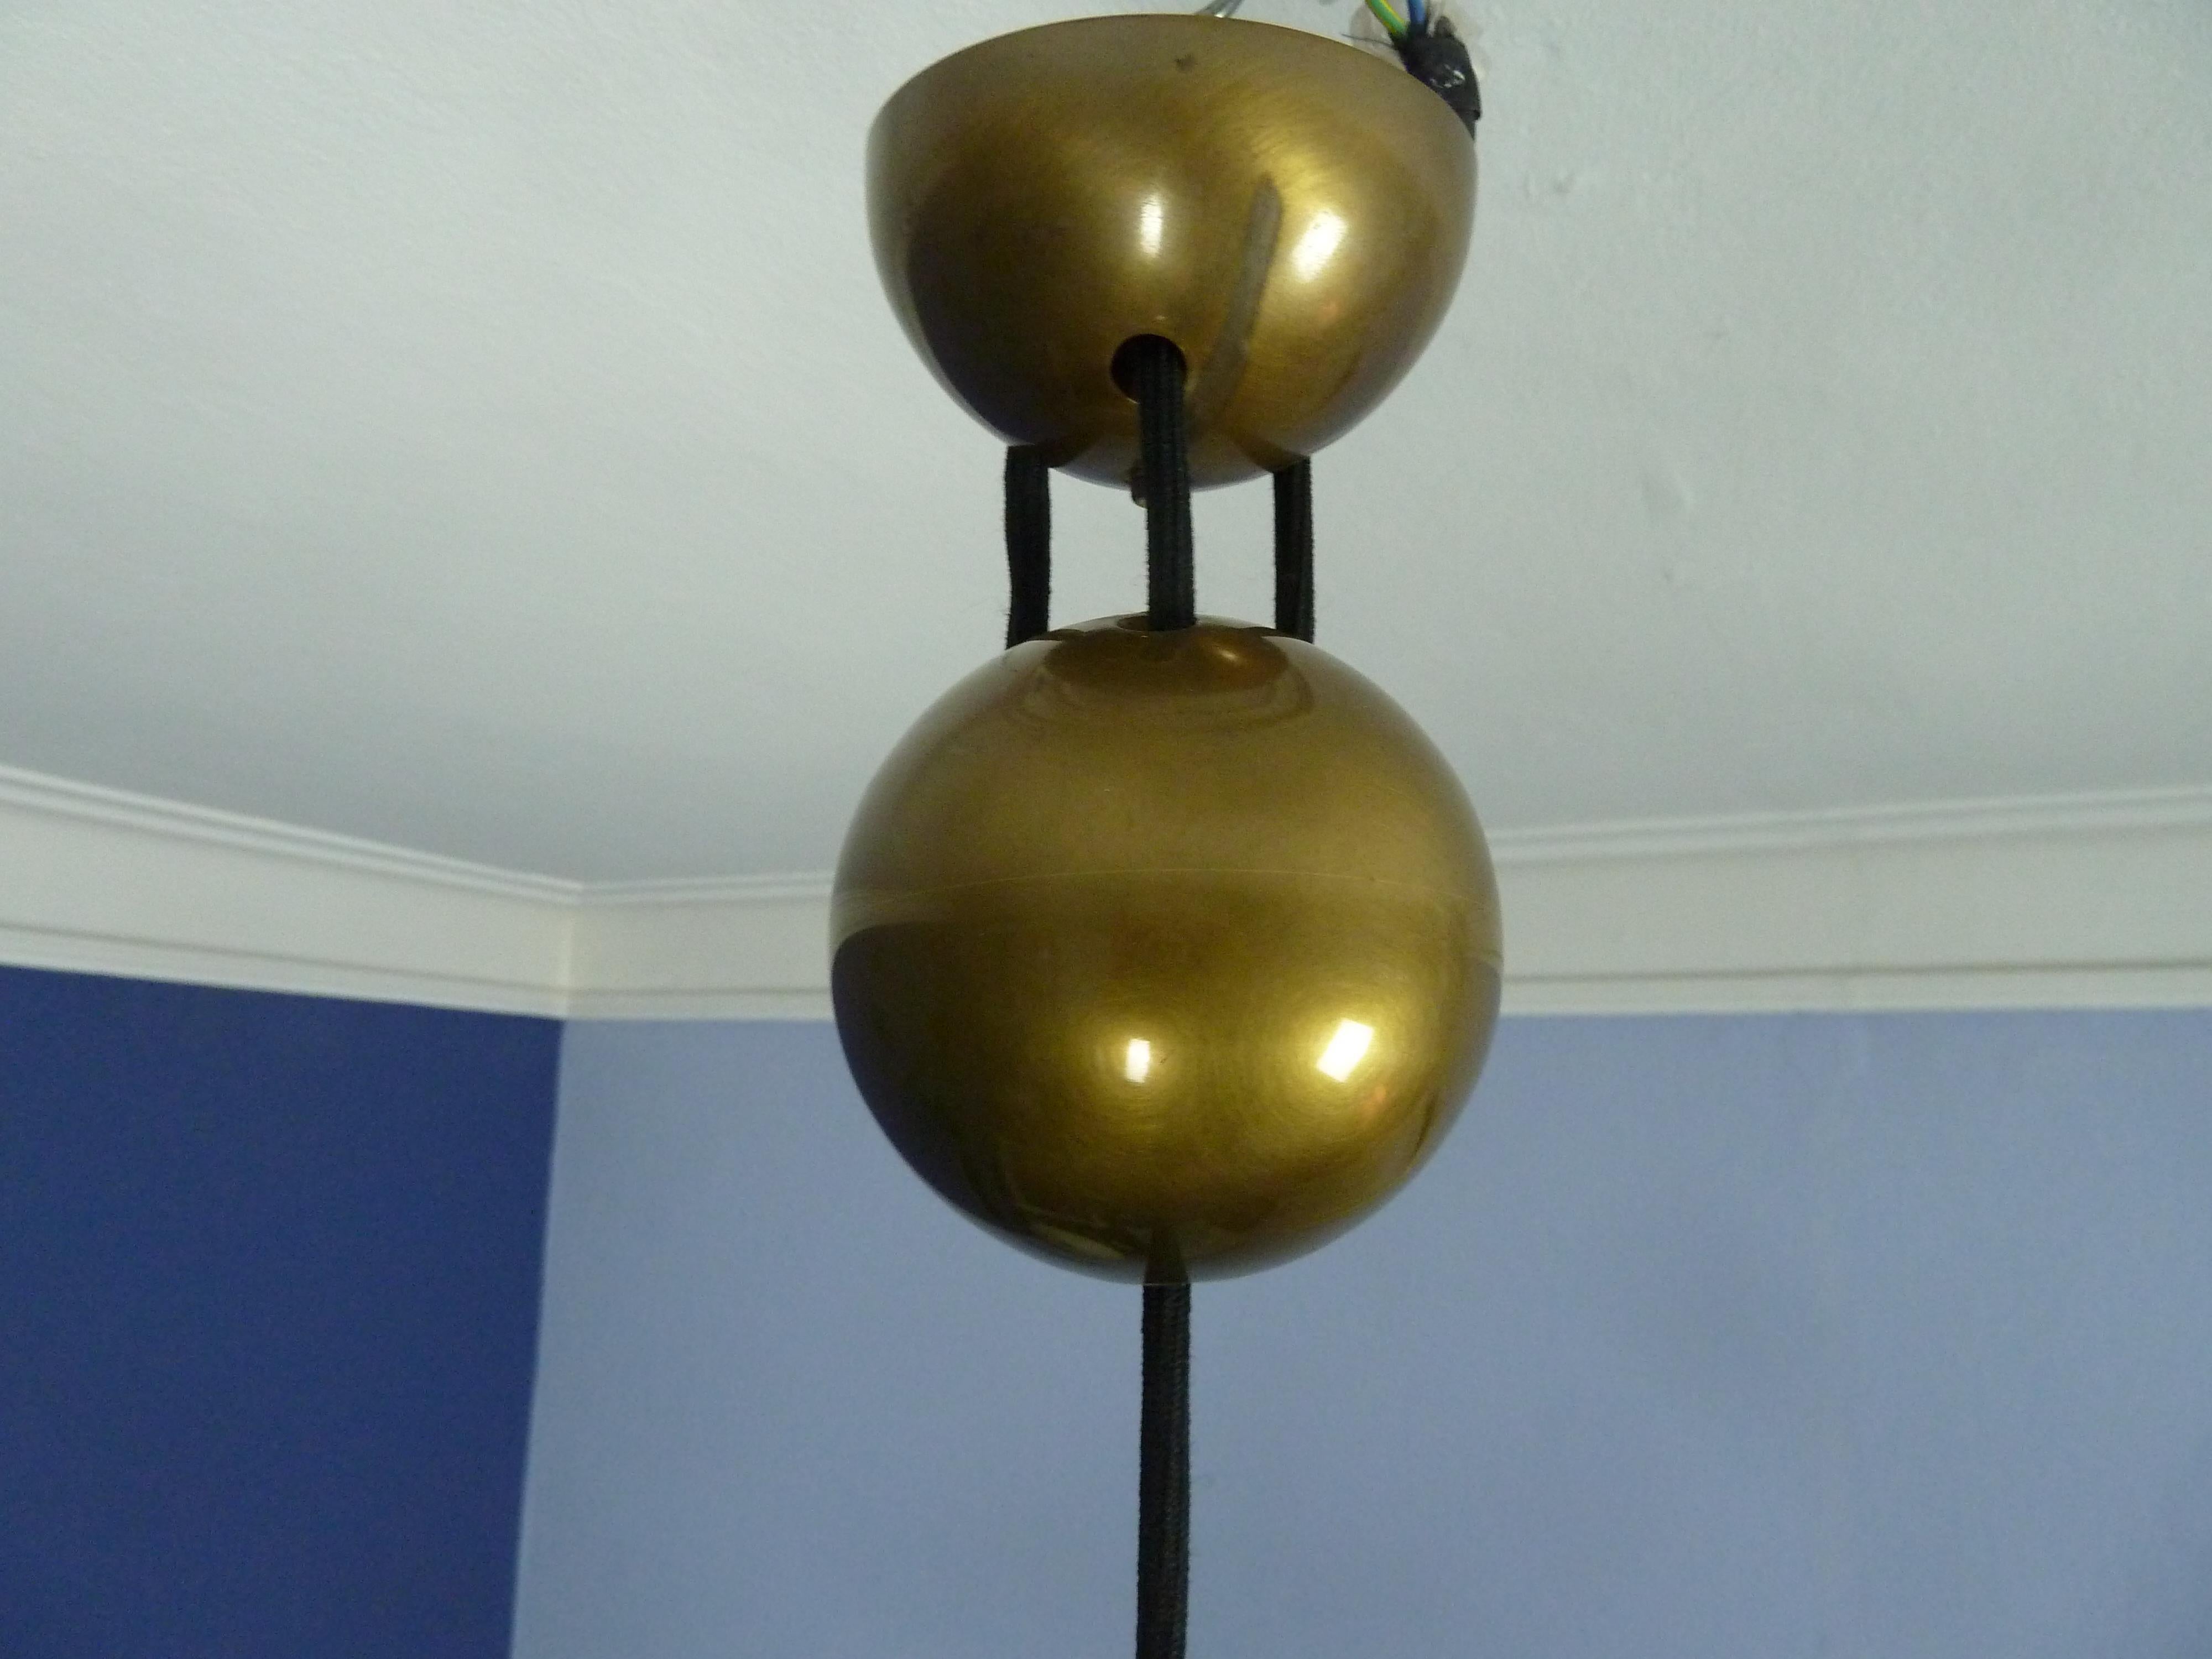 Adjustable Brass Pendant Onos55 by Florian Schulz with a Central Counterweight 3